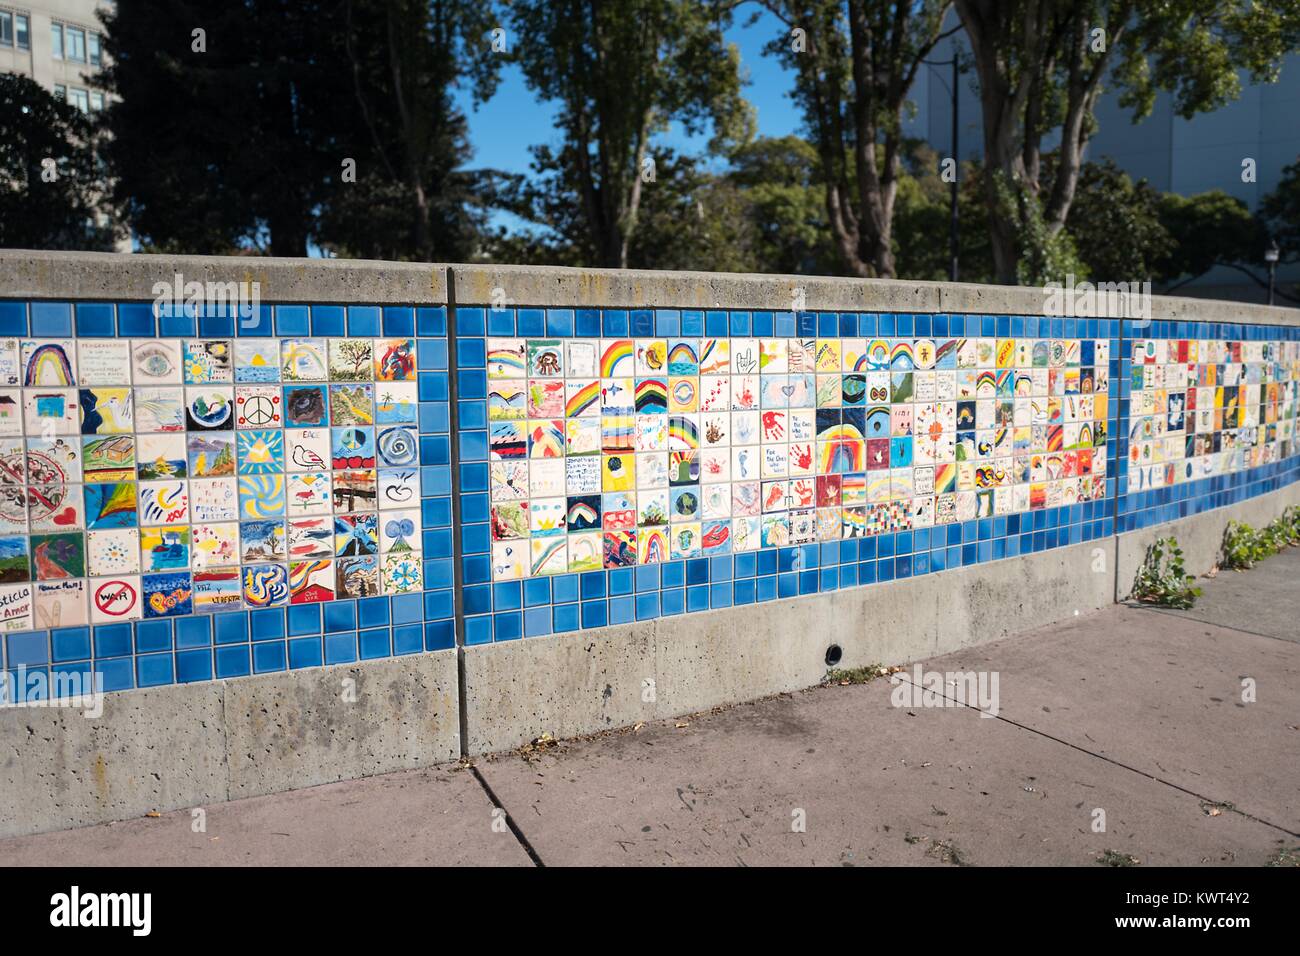 Berkeley World Wall of Peace at Martin Luther King Jr Civic Center Park in Berkeley, California, which was the site of violent 2017 protests and clashes between members of the alt-right and counter protesters, October 6, 2017. () Stock Photo